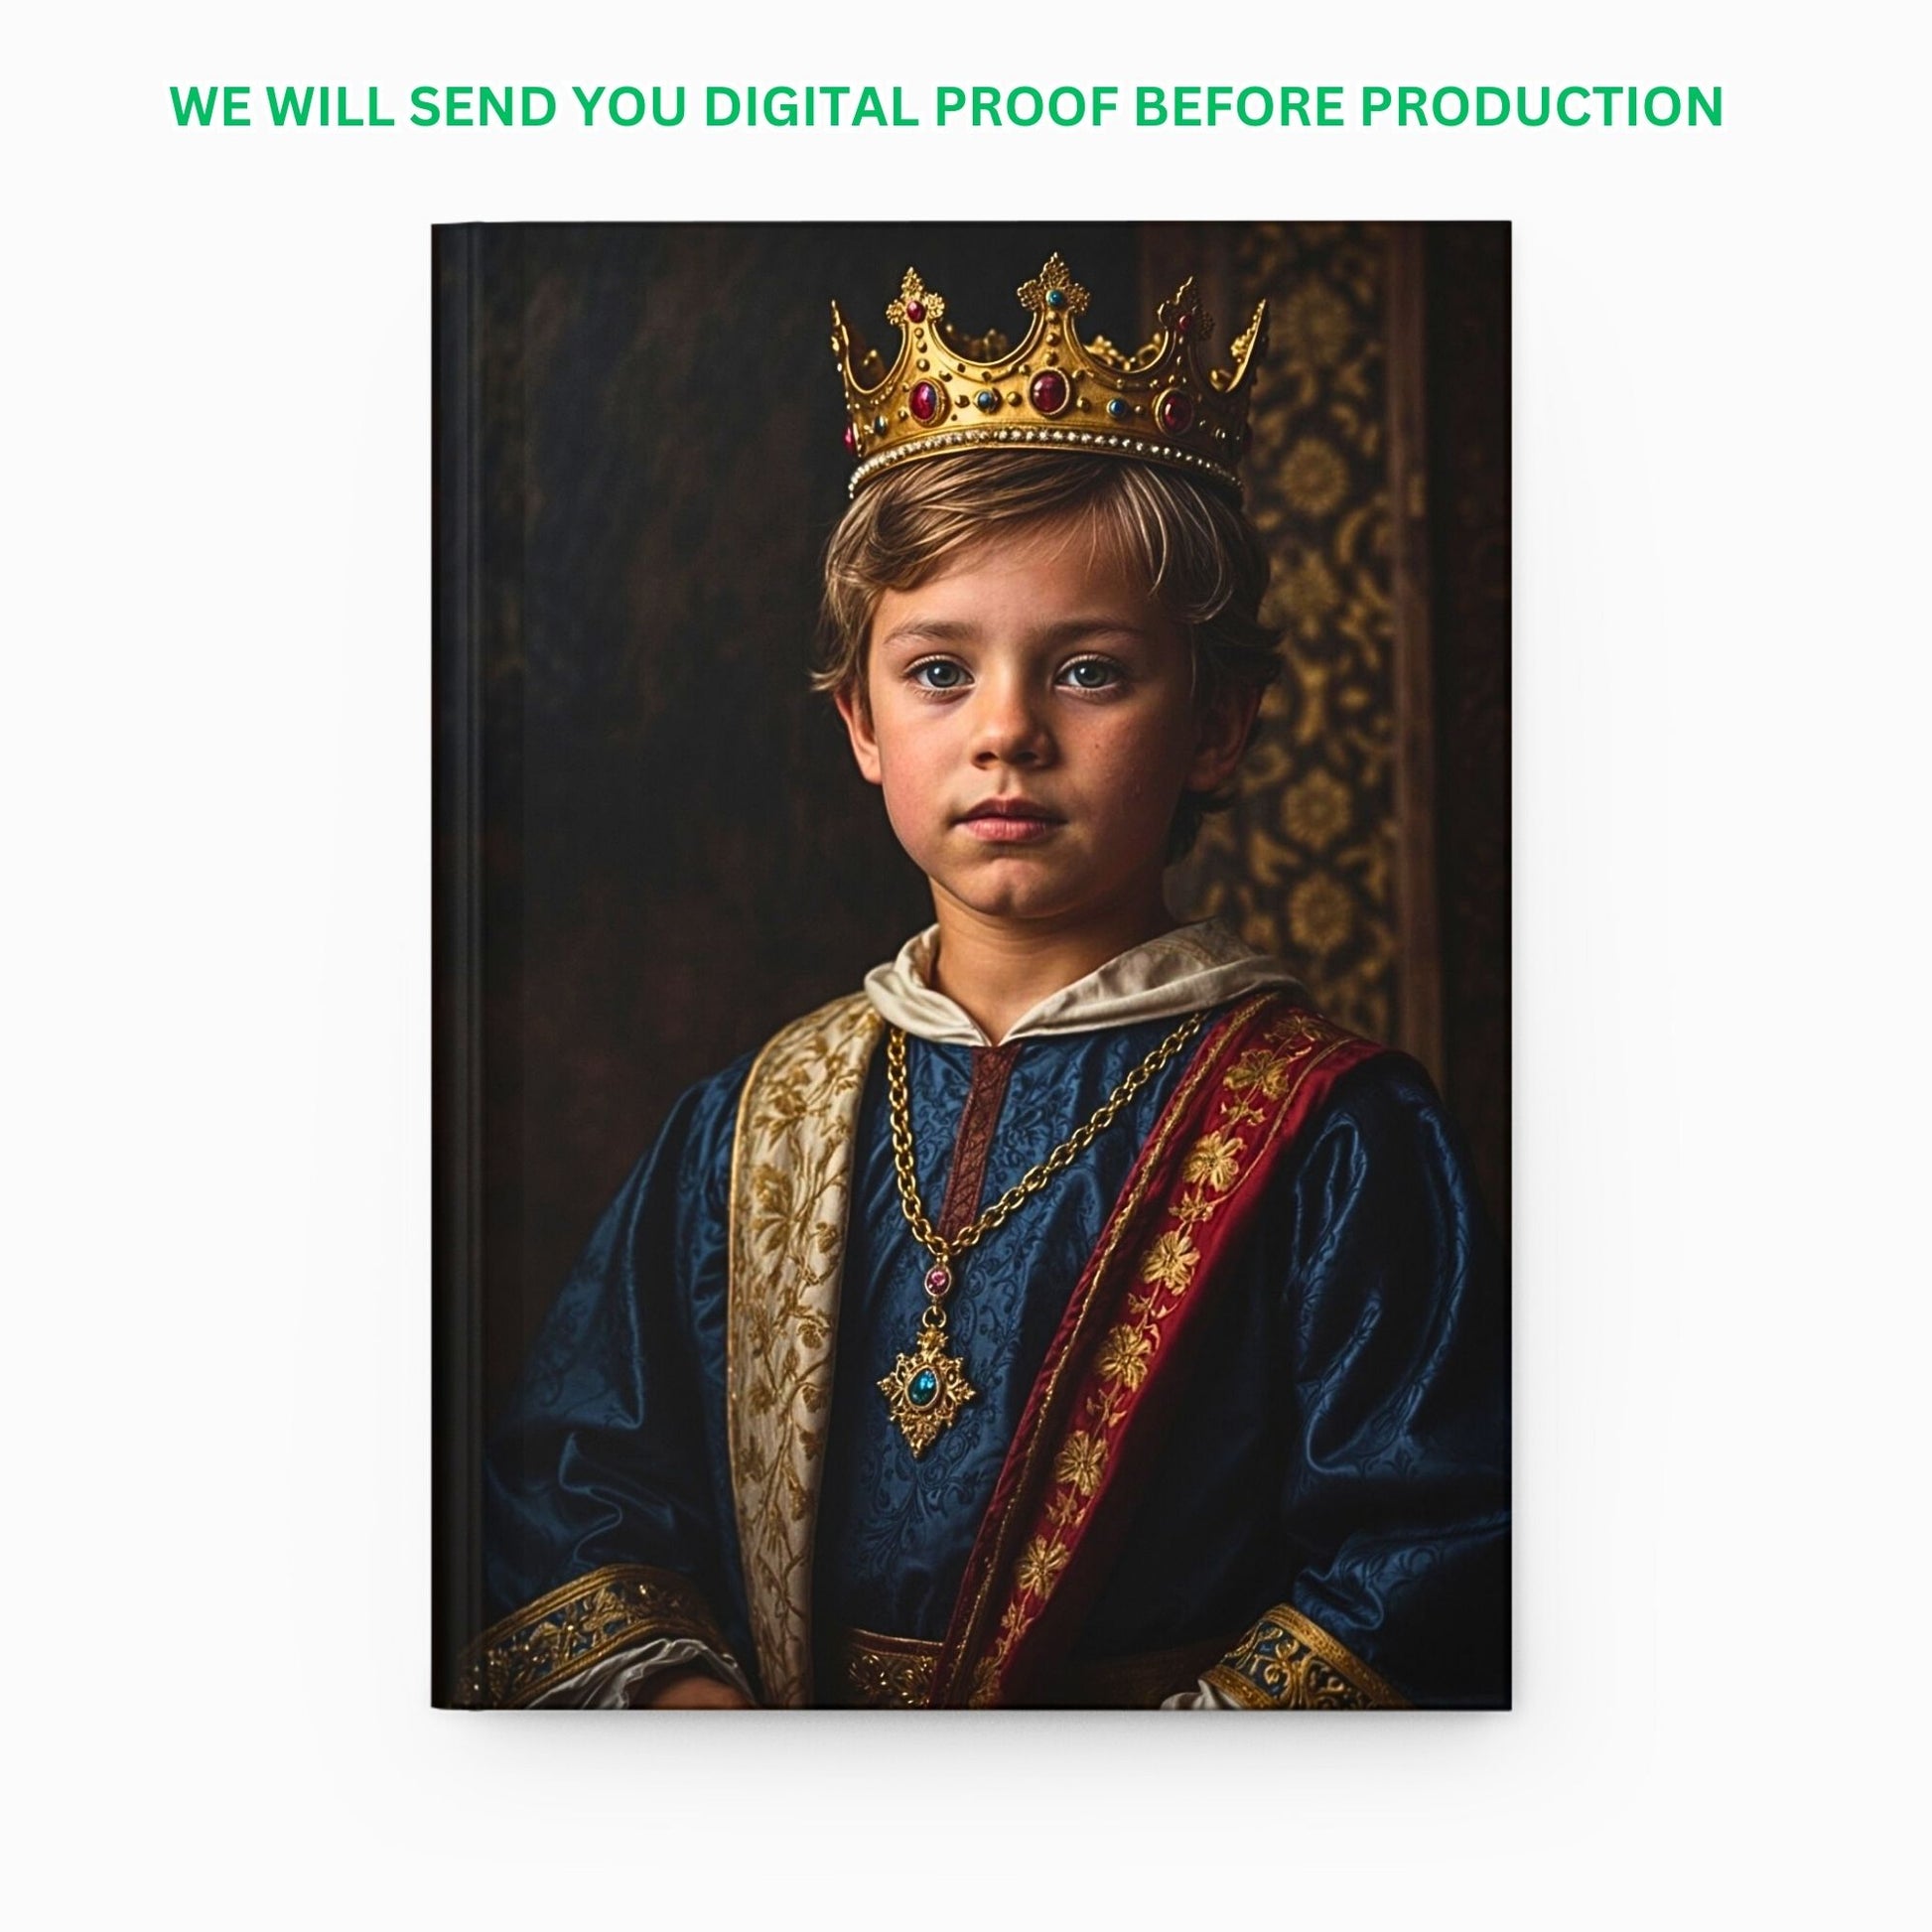 Transform mundane photos of your children into timeless heirlooms with our exquisite Custom Kids Royal Journal from Photo. This personalized journal reimagines your child's portrait in the style of a historical royal manuscript, blending sophistication with sentimentality.